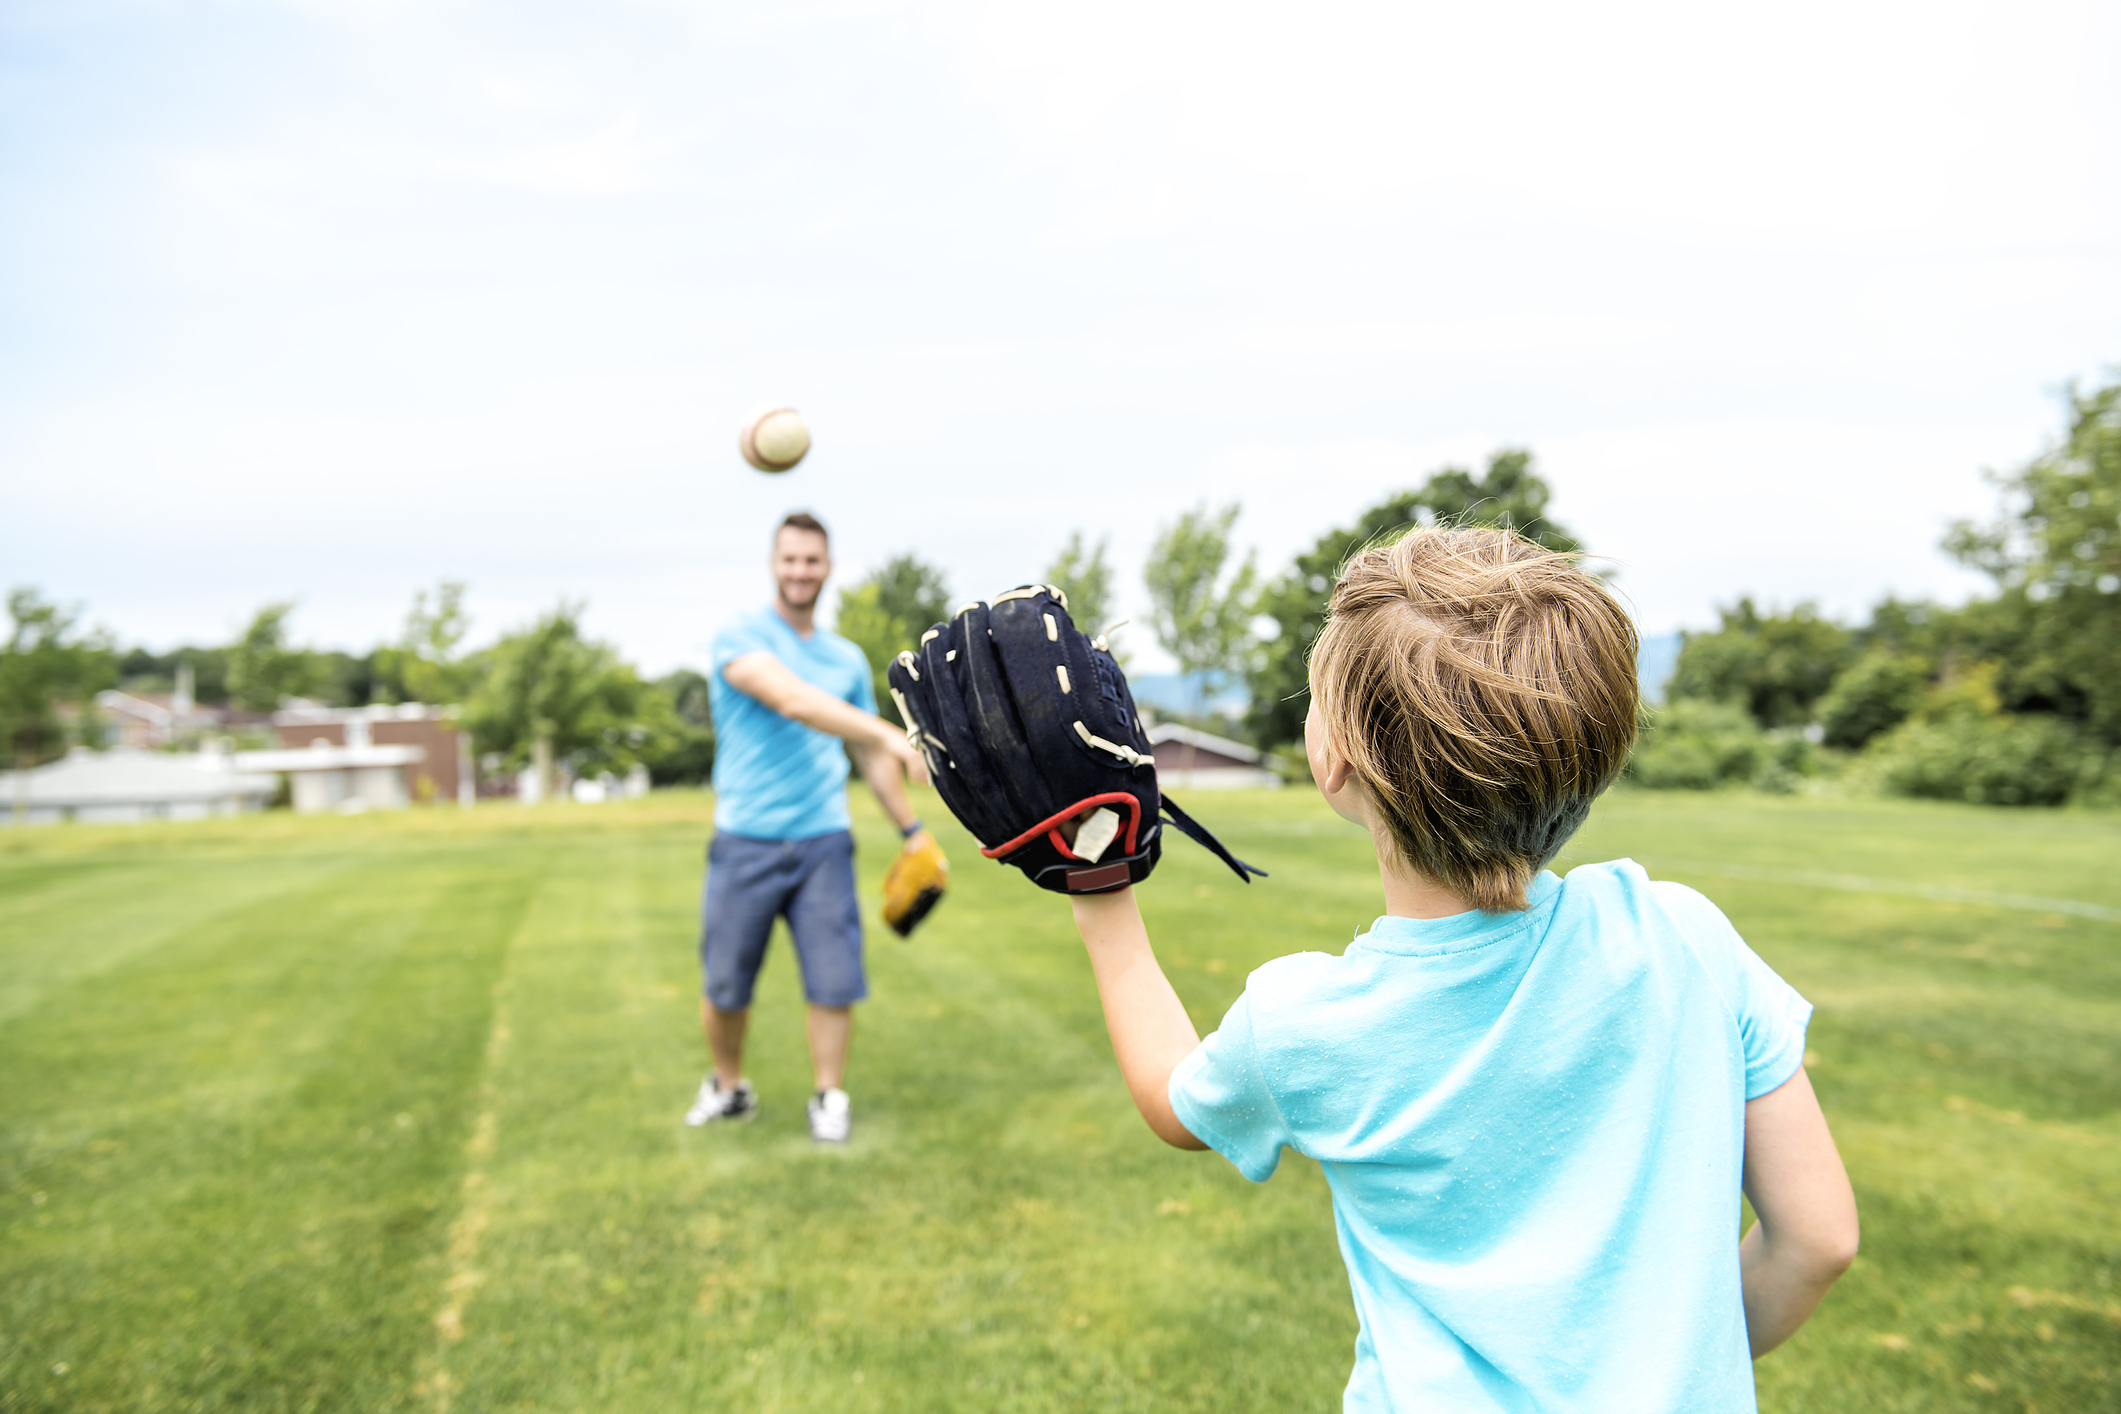 A father and son playing catch in a grassy field